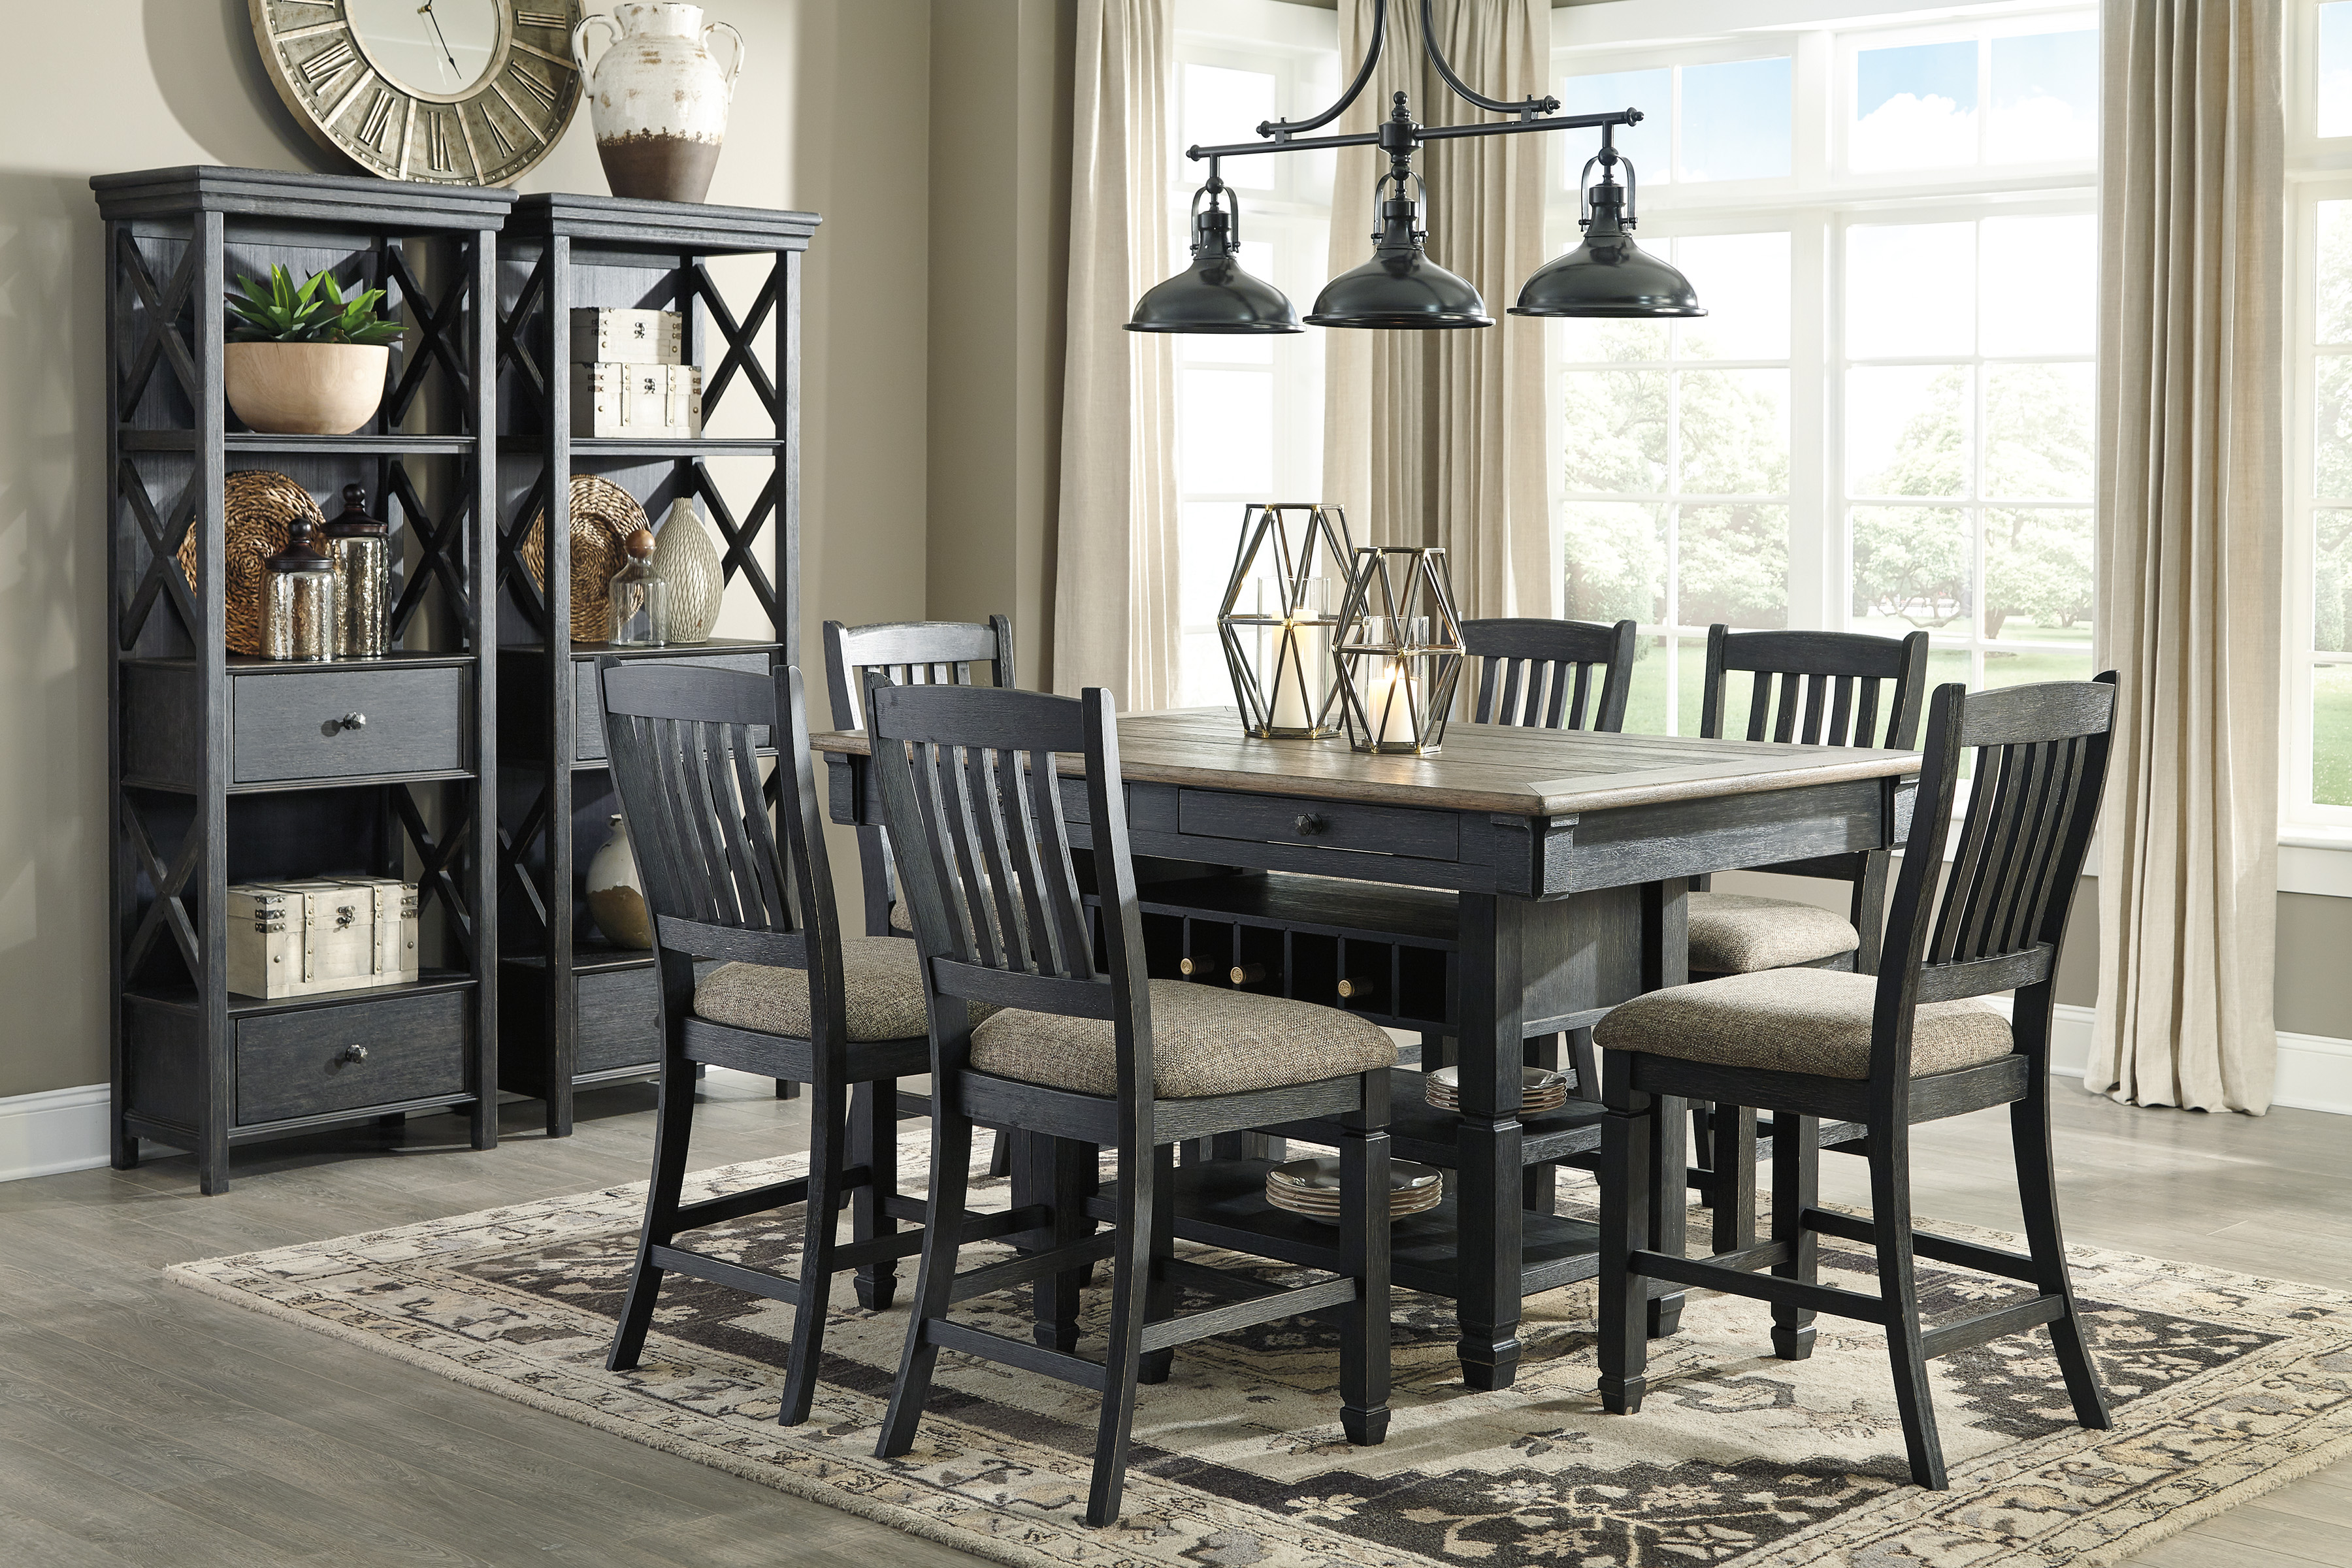 Just In: Ashley Furniture Homestore Launches the Elegant Tyler Creek Dining Furniture Collection